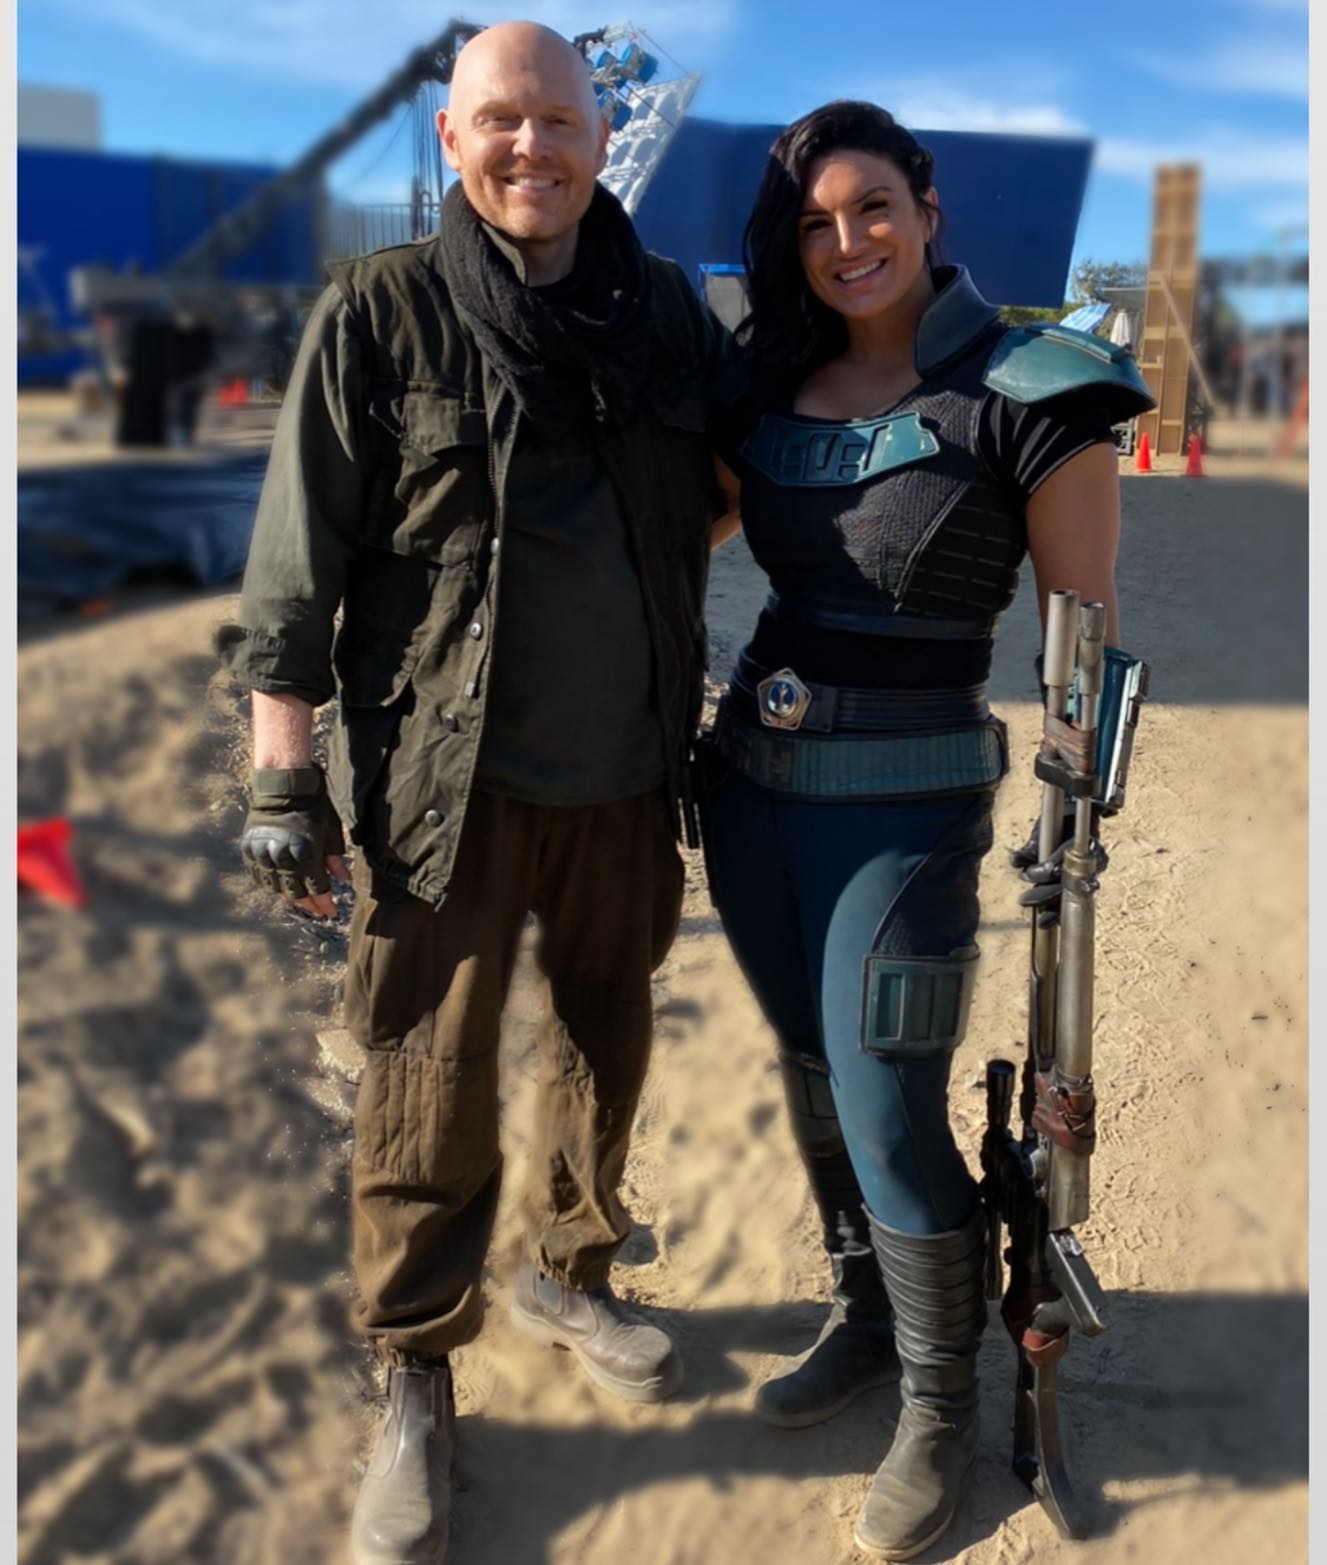 Gina Carano on the set of The Mandalorian with Bill Burr